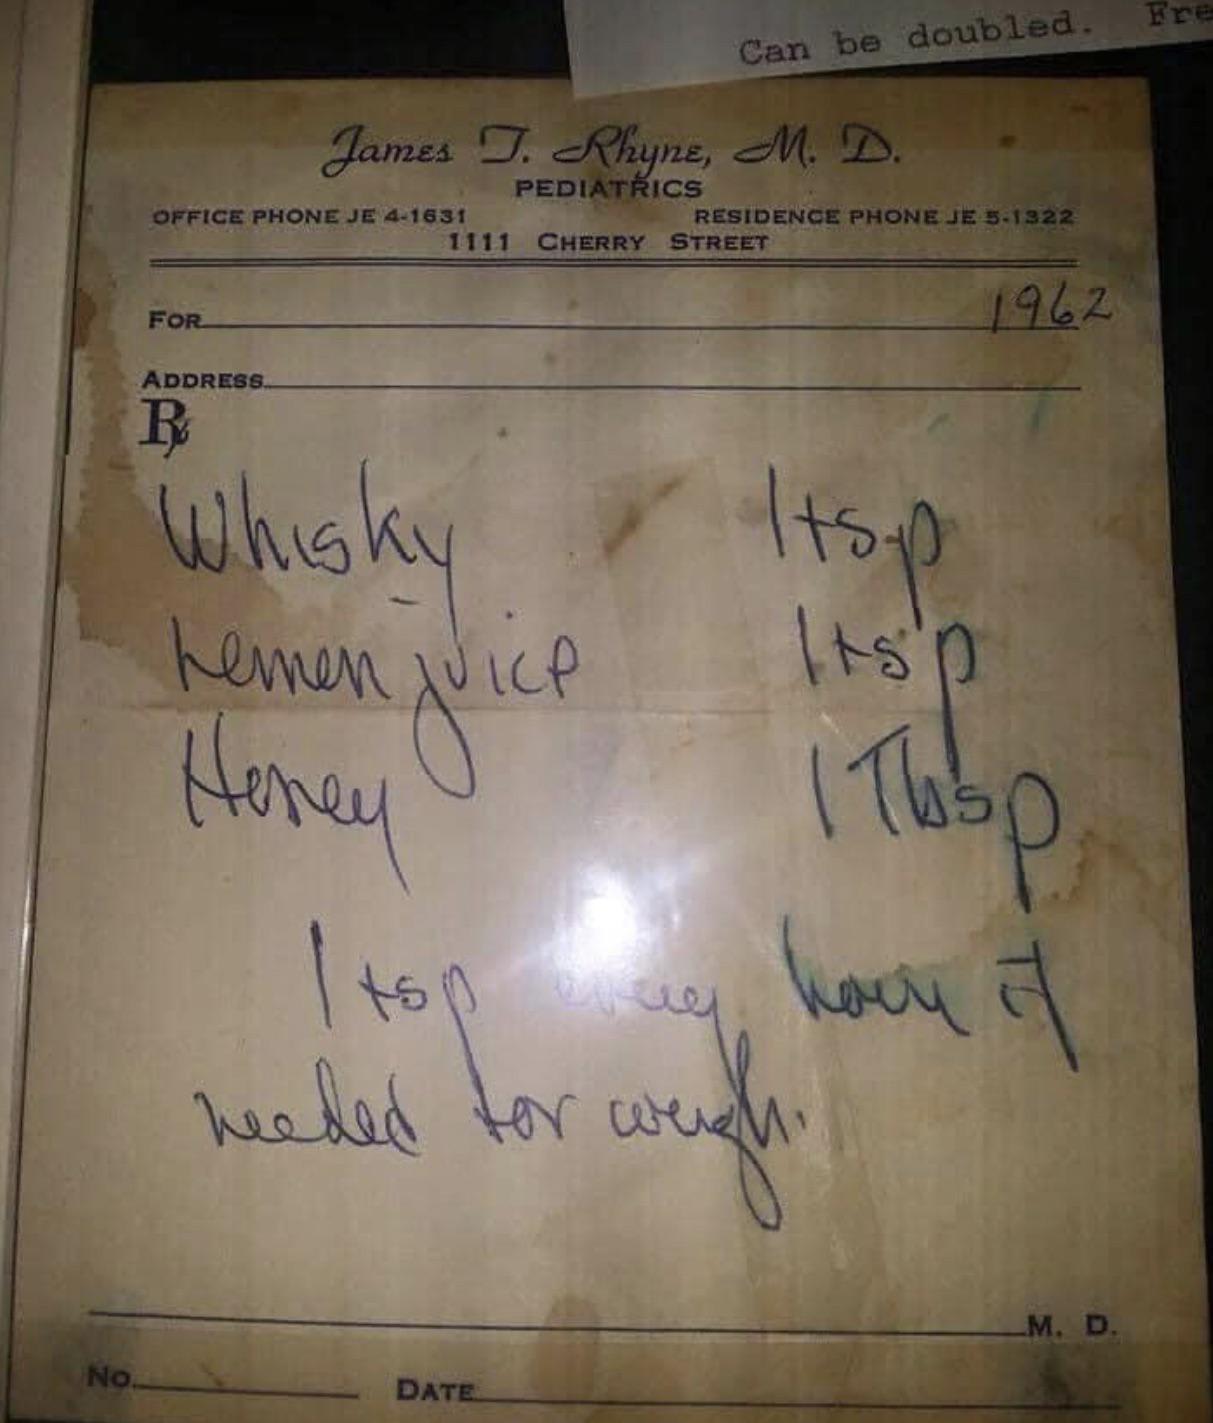 1962 cough “prescription” by a pediatrician (note home phone # on top)